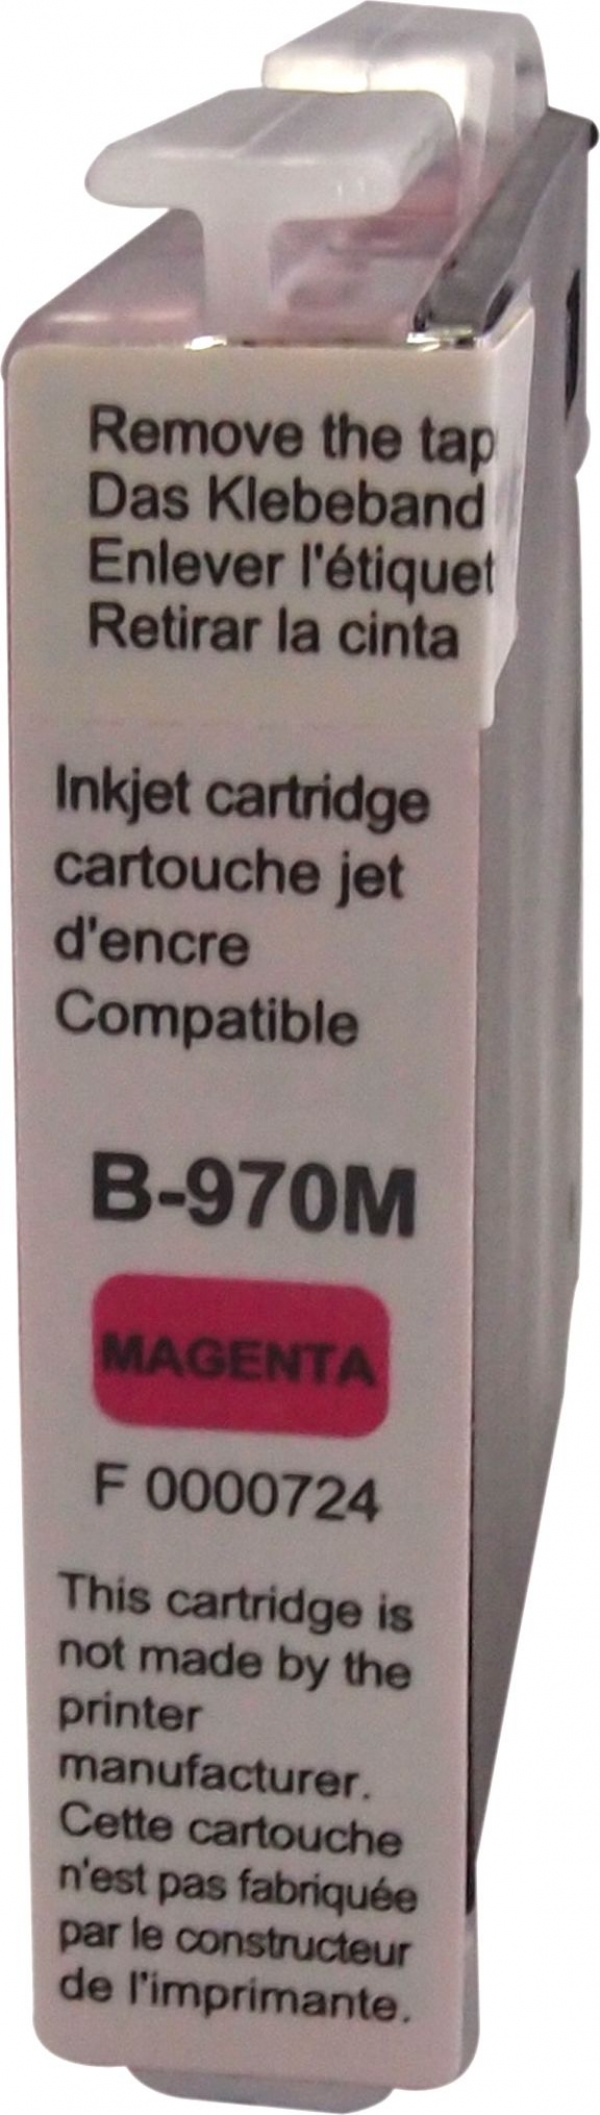 Cartouche encre UPrint compatible BROTHER LC-970M magenta